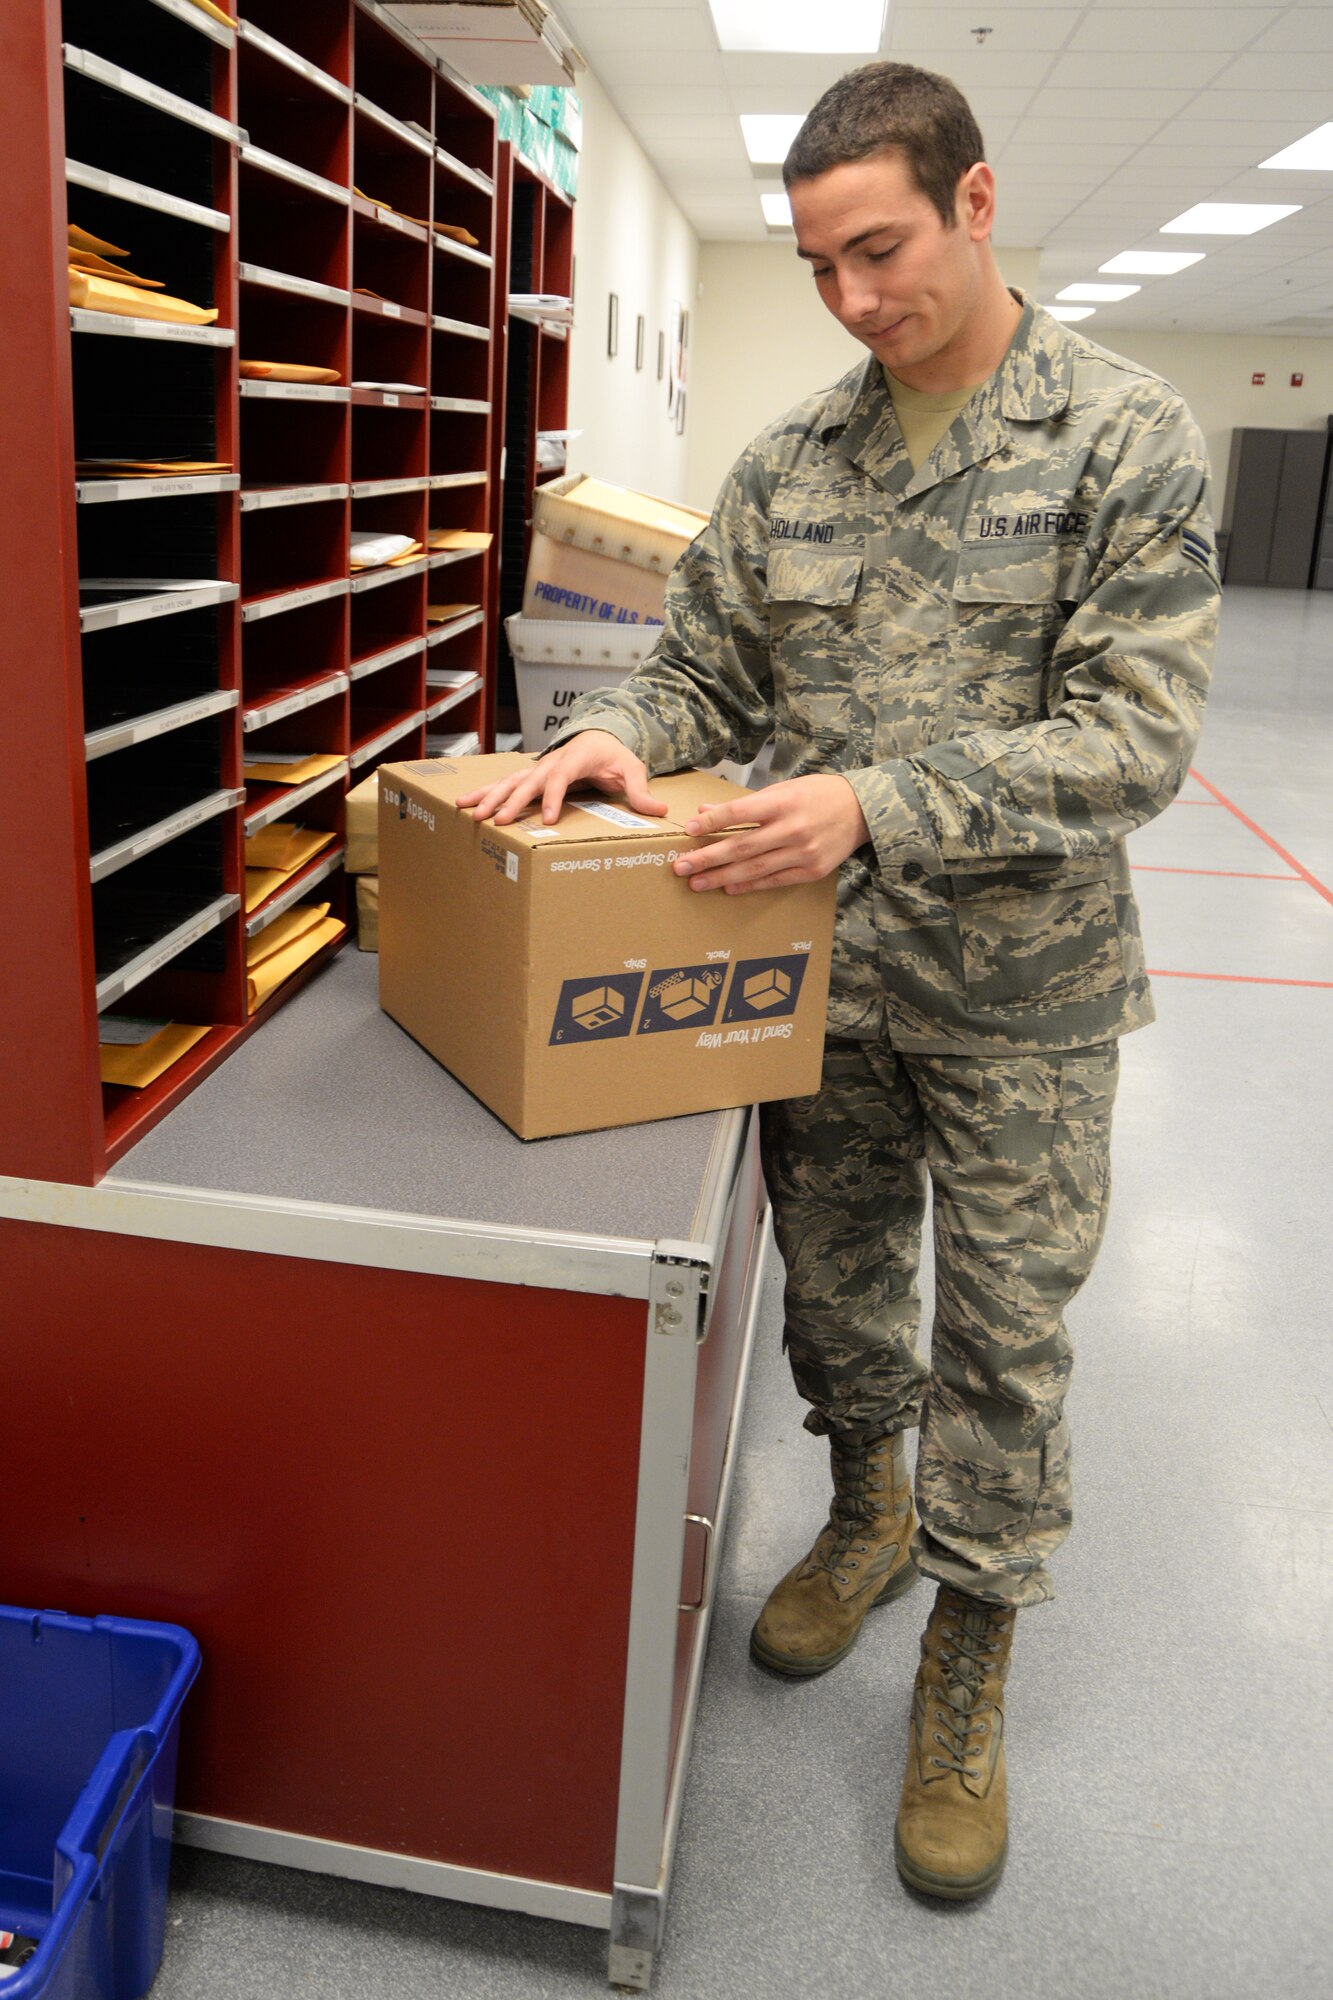 Airman 1st Class Ryan Holland, postal apprentice, prepares a box to make a consolidated package June 24, 2015, Scott Air Force Base, Illinois. Holland was one of the Airmen that helped streamline the program helping save the official mail center money. (U.S. Air Force photo by Airman 1st Class Melissa Estevez)